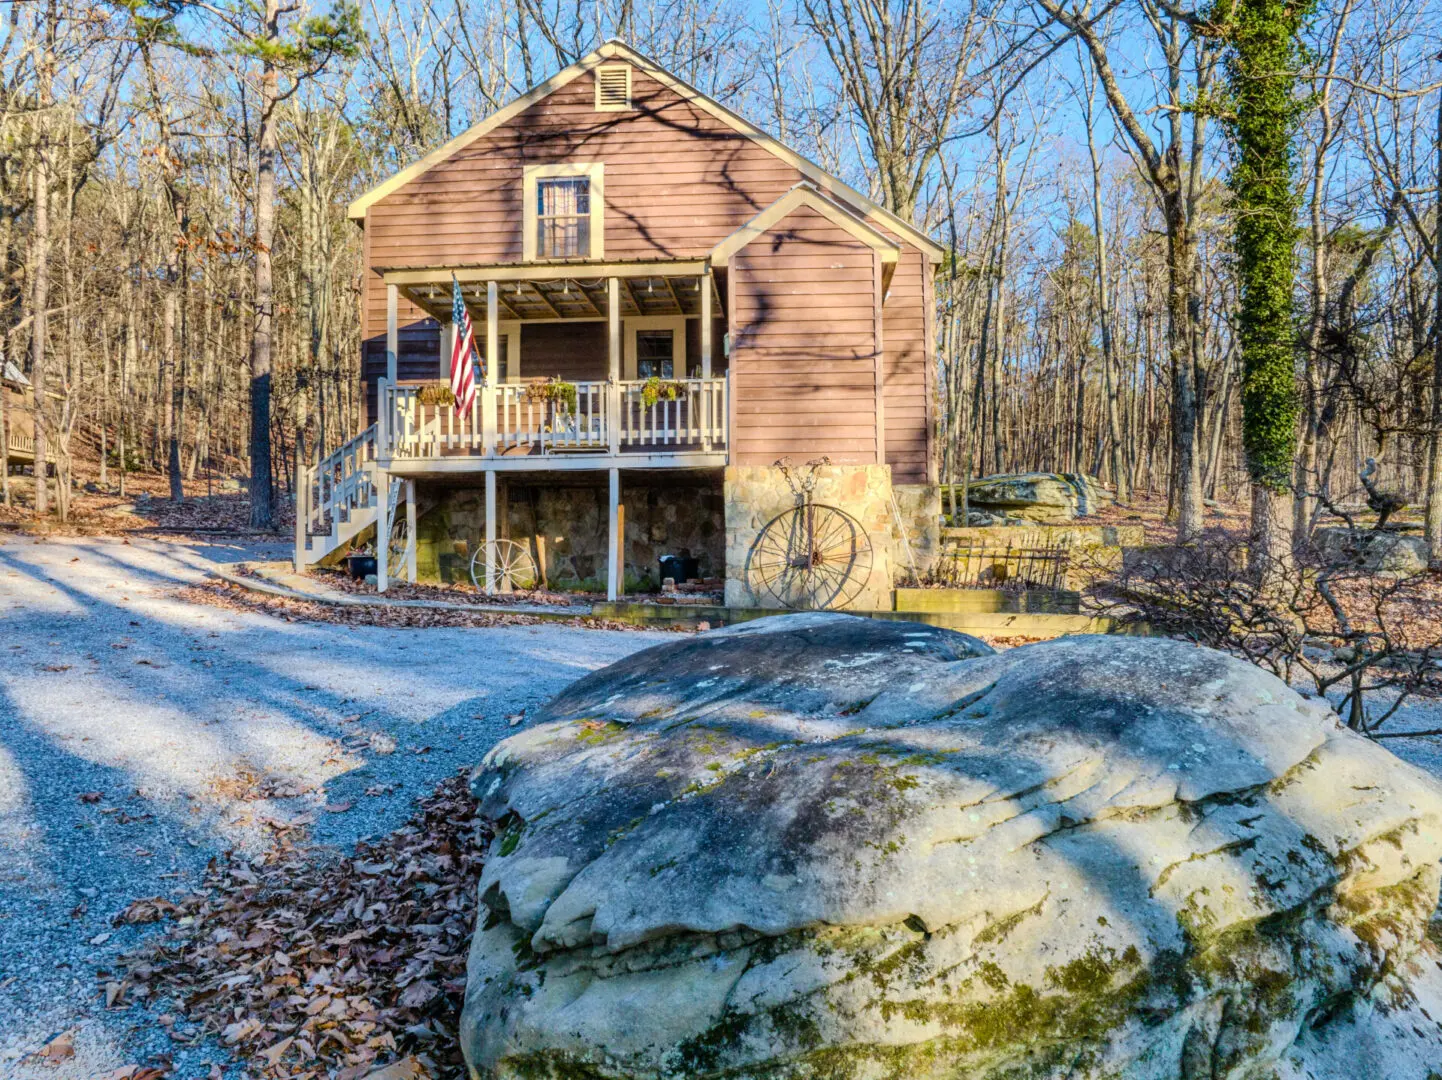 Cabin Rentals in Mentone: A cozy cabin nestled in the tranquil woods with a charming rock in front.